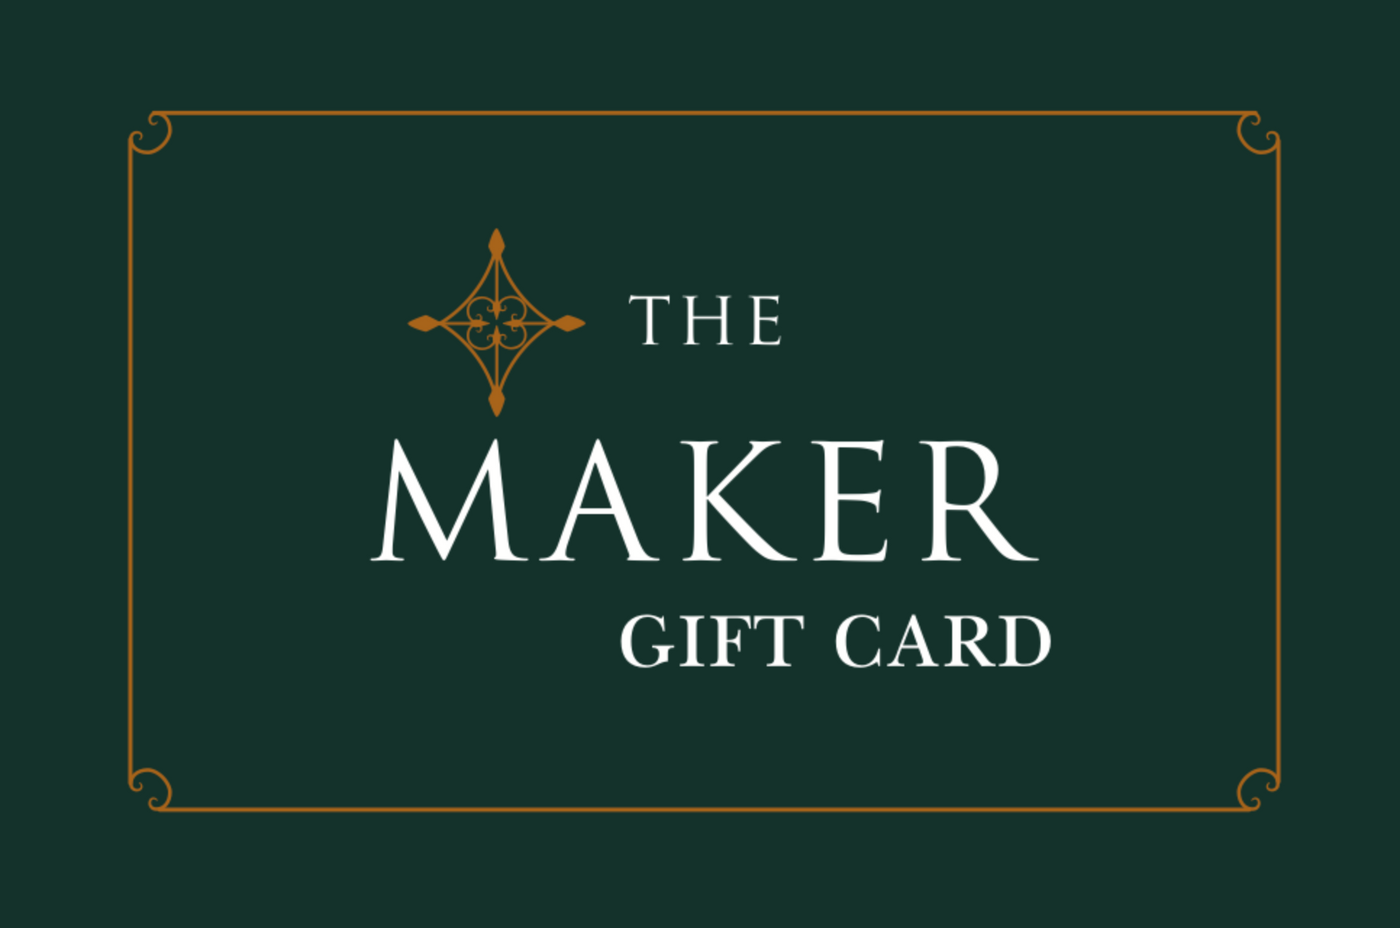 The Maker Promotional Gift Card